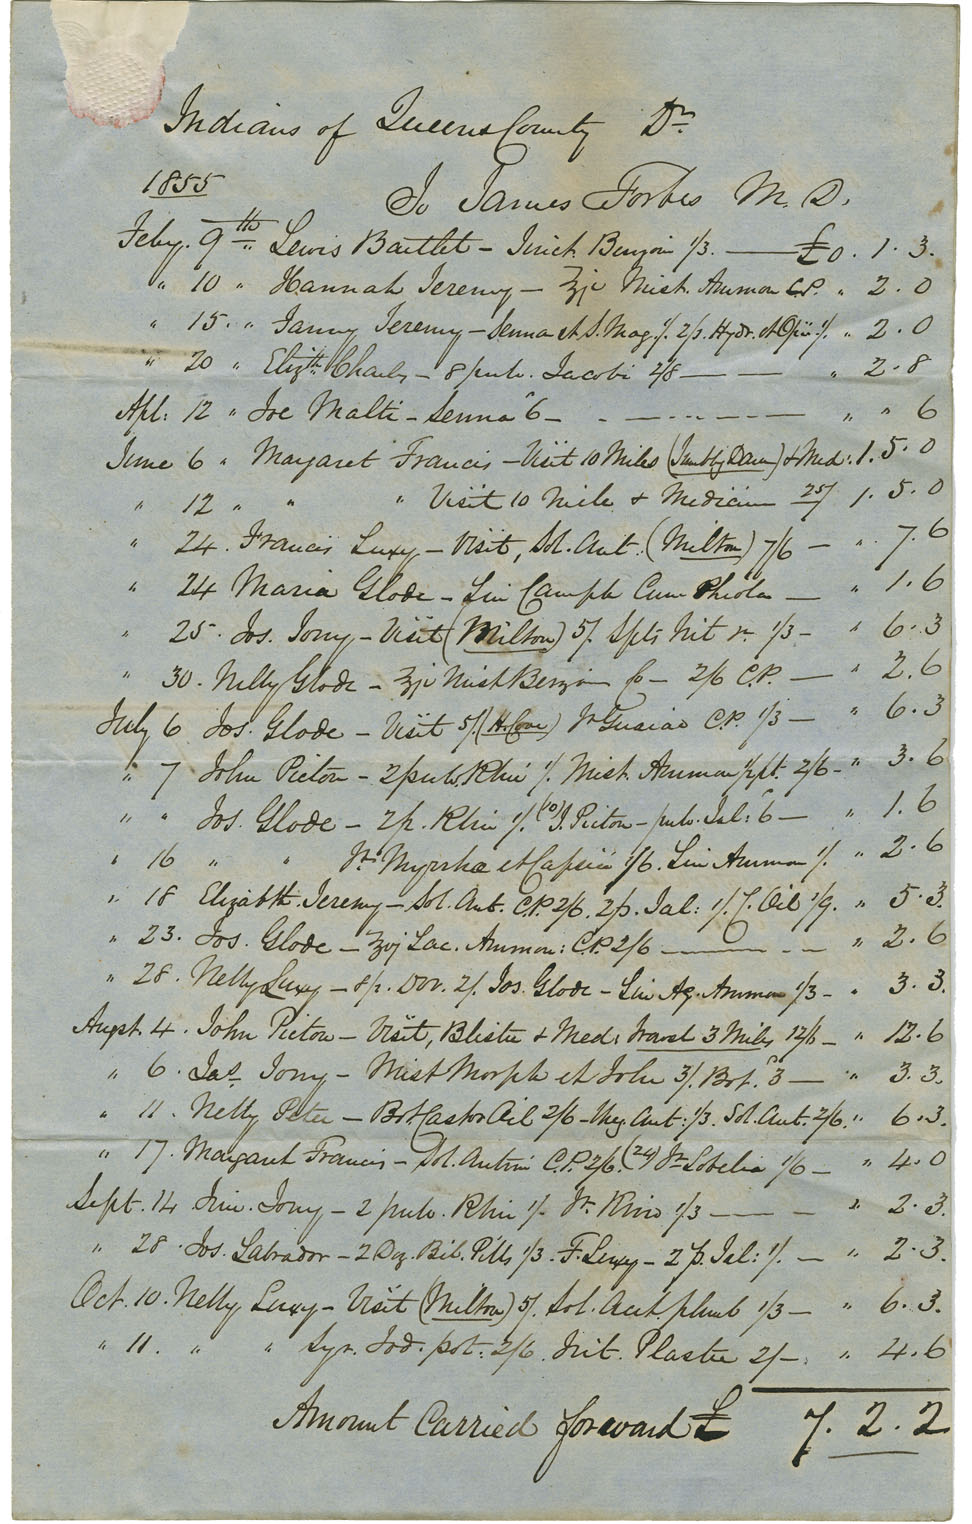 Petition of James Forbes for payment of services to Mi'kmaq of Liverpool.